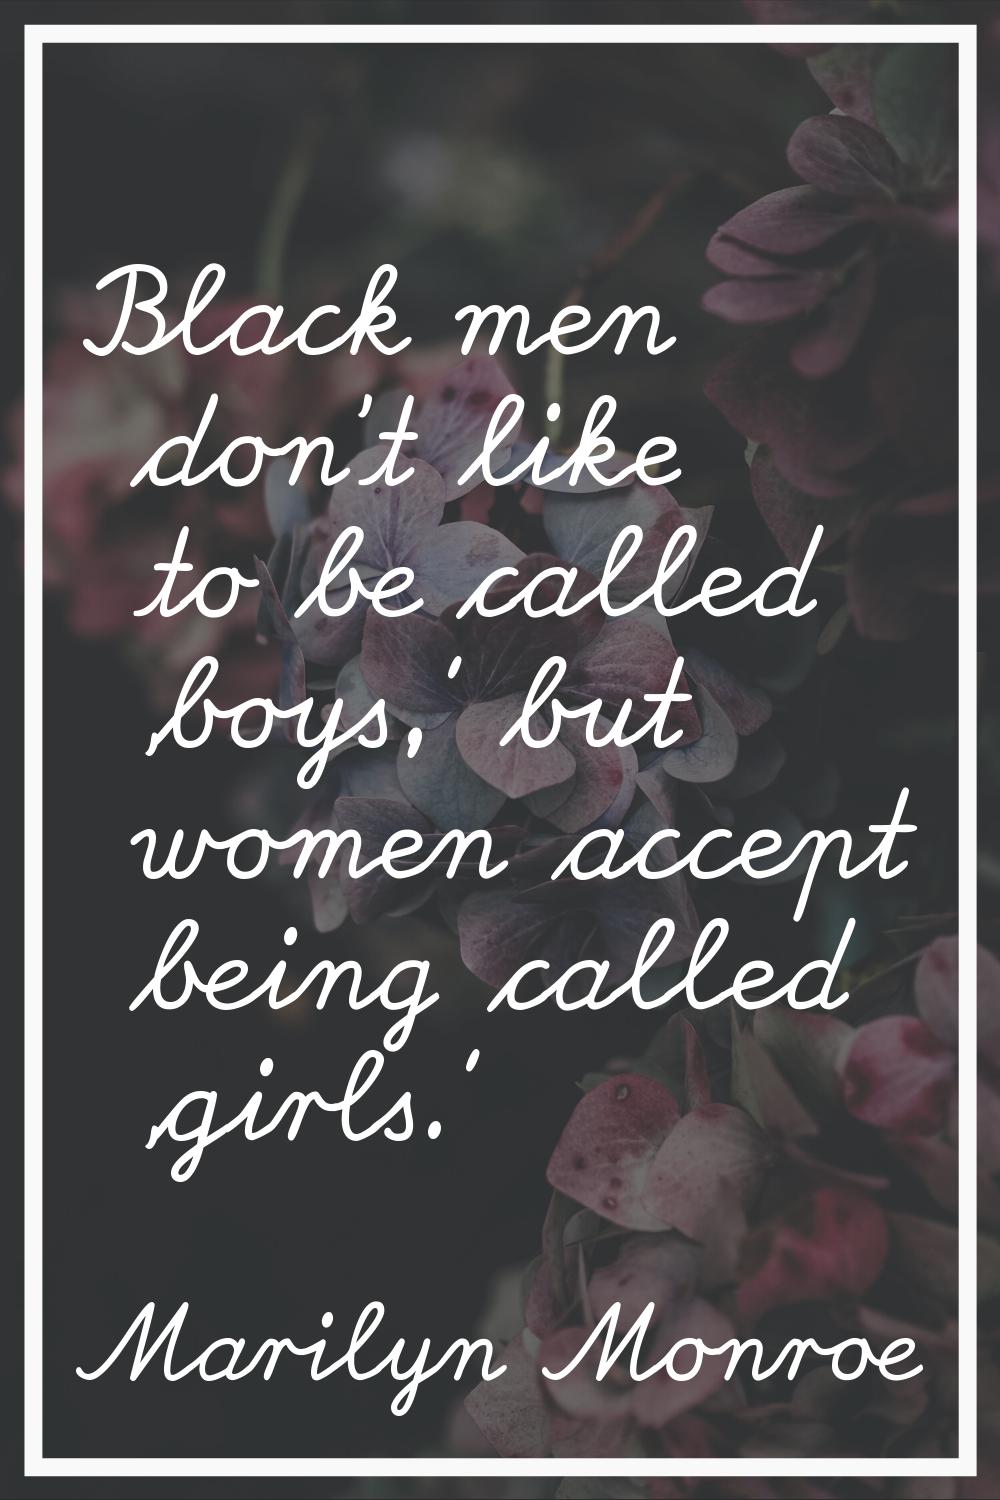 Black men don't like to be called 'boys,' but women accept being called 'girls.'